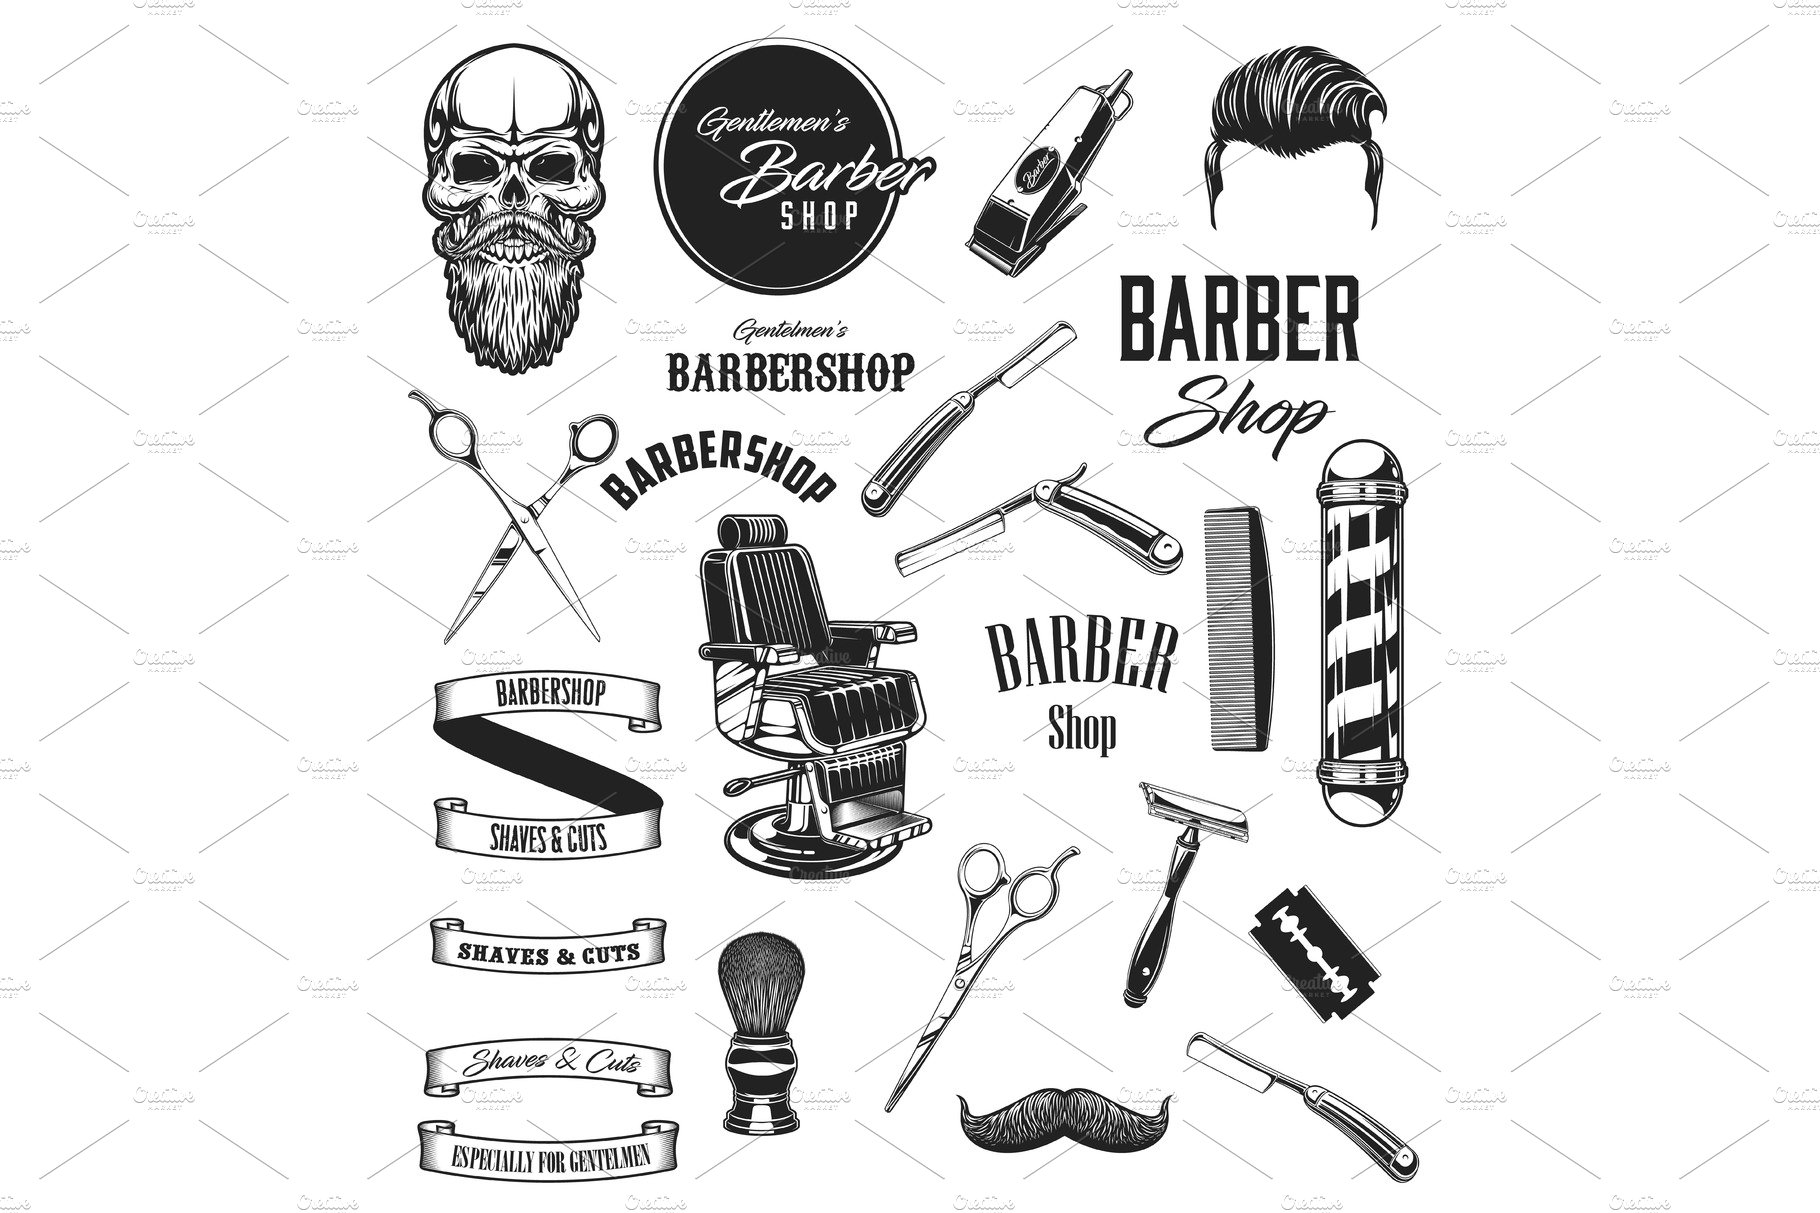 Barbershop icons and barber tools cover image.